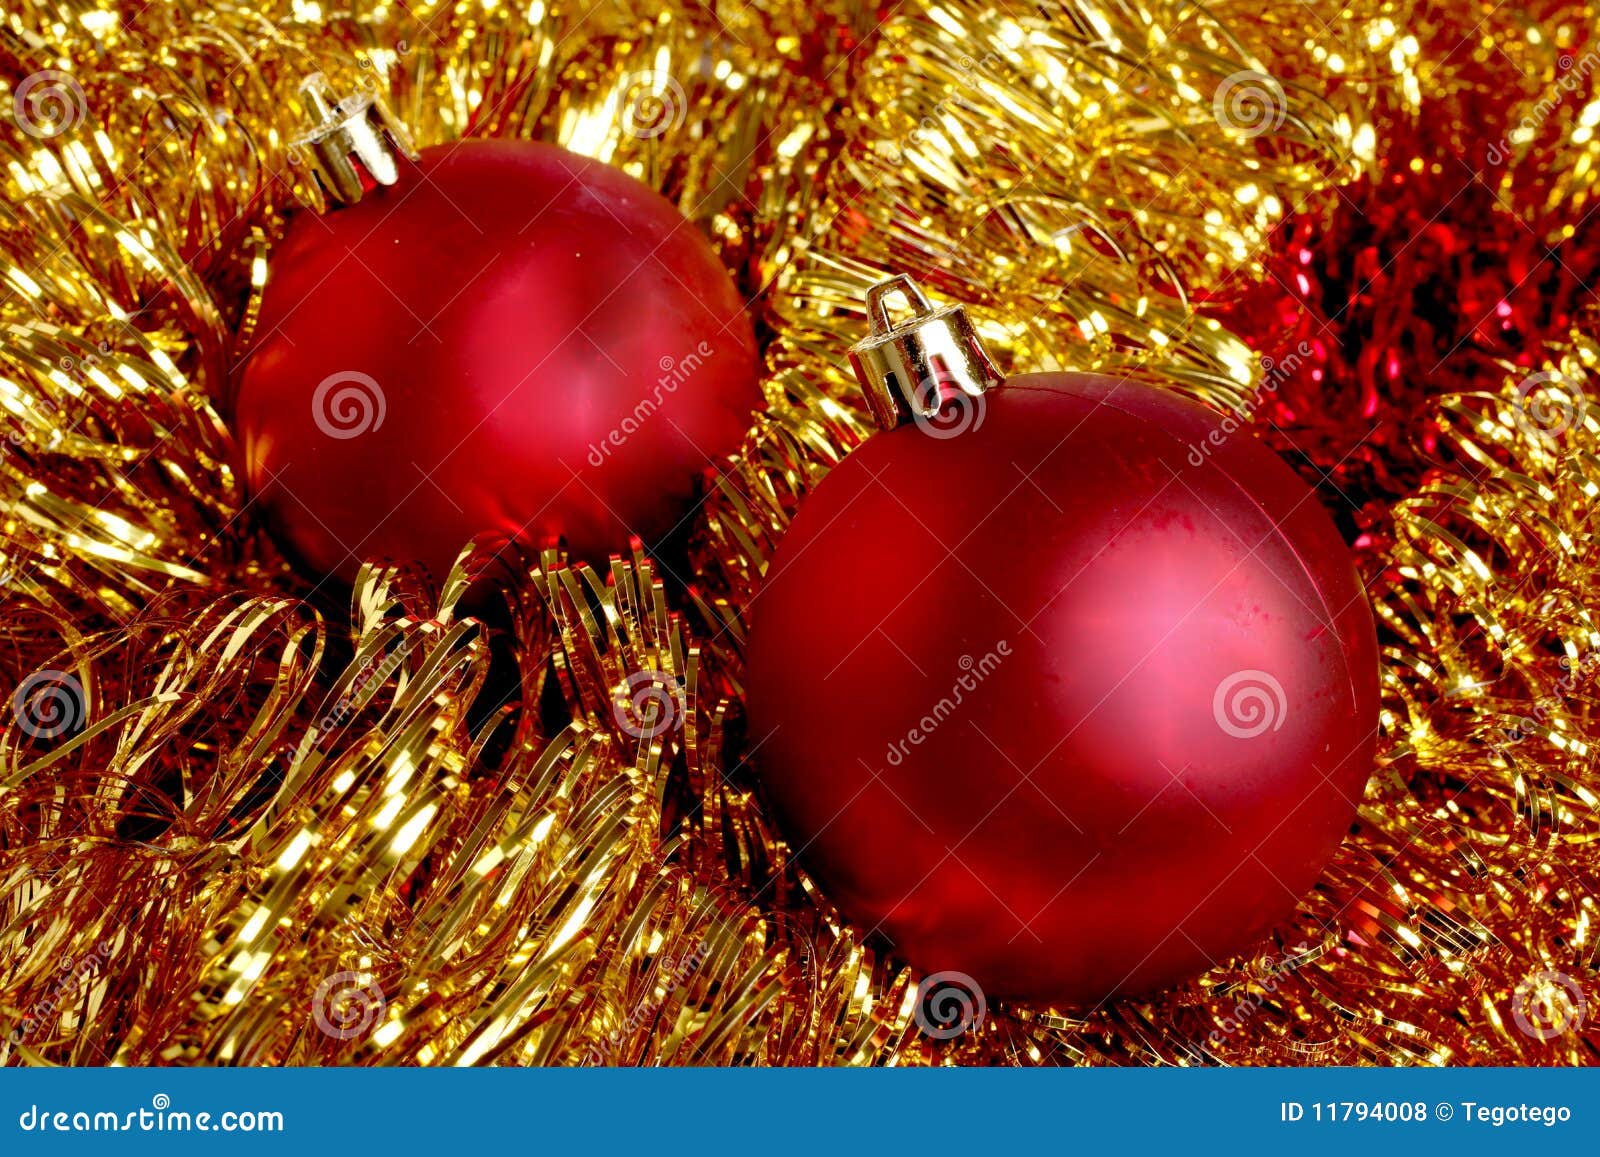 Red Balls on Christmas Decoration Stock Photo - Image of golden, circle ...